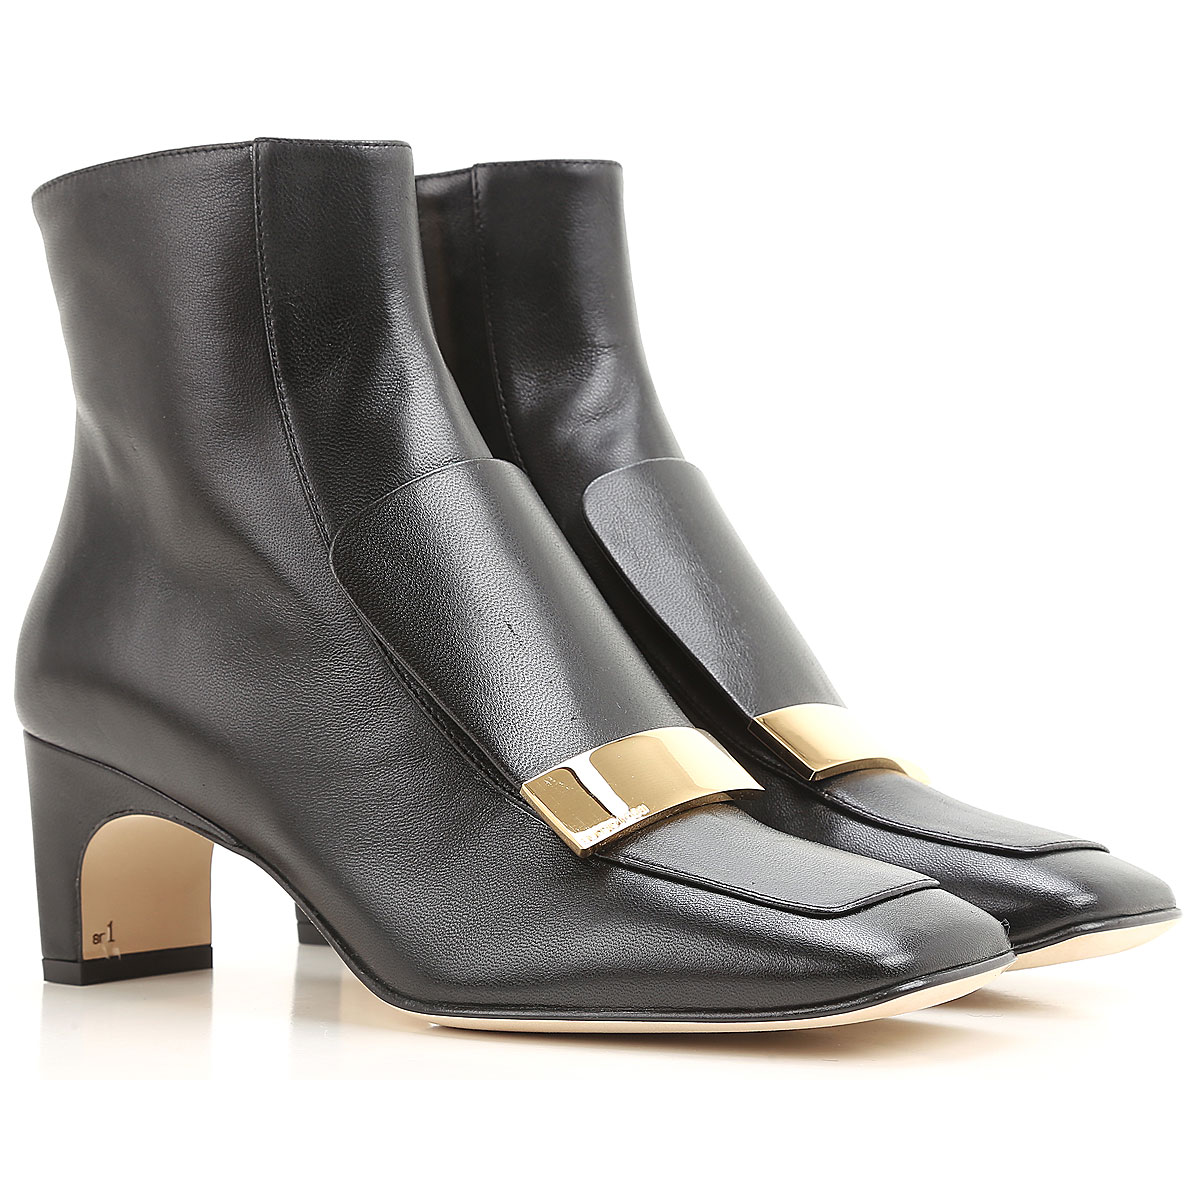 Chaussures Femme Sergio Rossi, Code produit: a78930-mnan07-1000